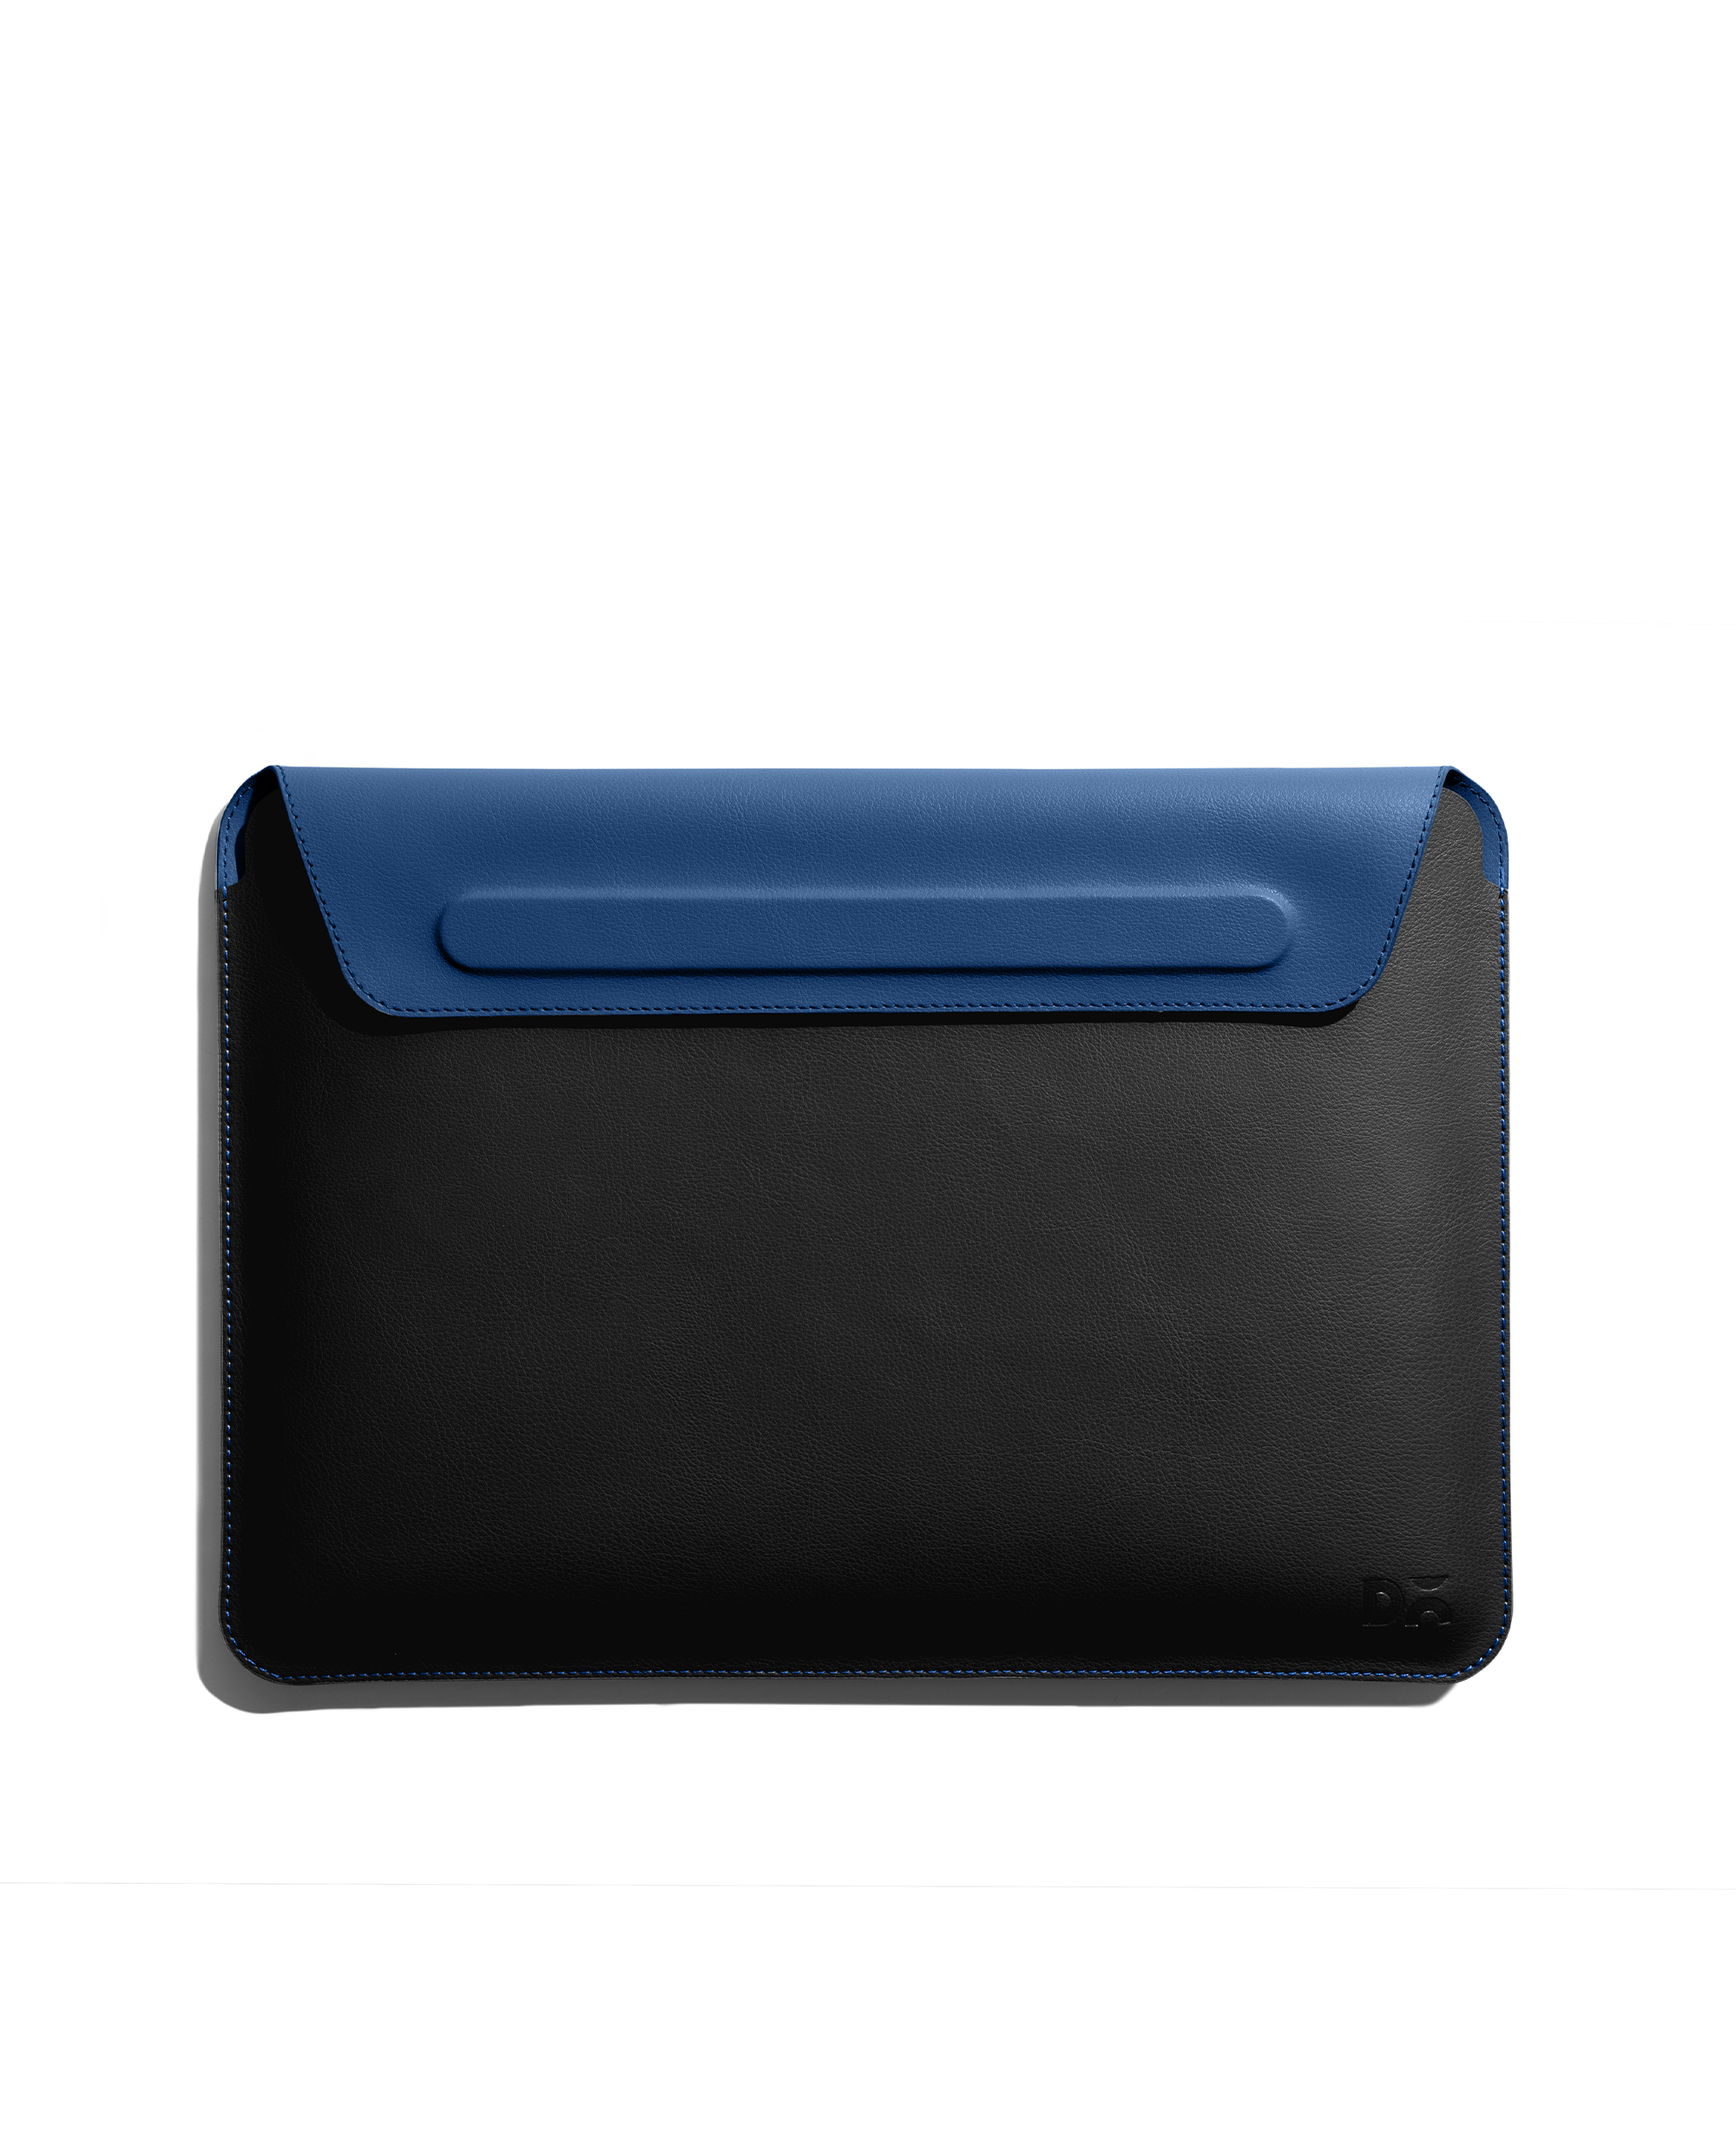 DailyObjects BlackBlue SnapOn Envelope Sleeve For Macbook AirPro 3302cm  13 inch Buy At DailyObjects